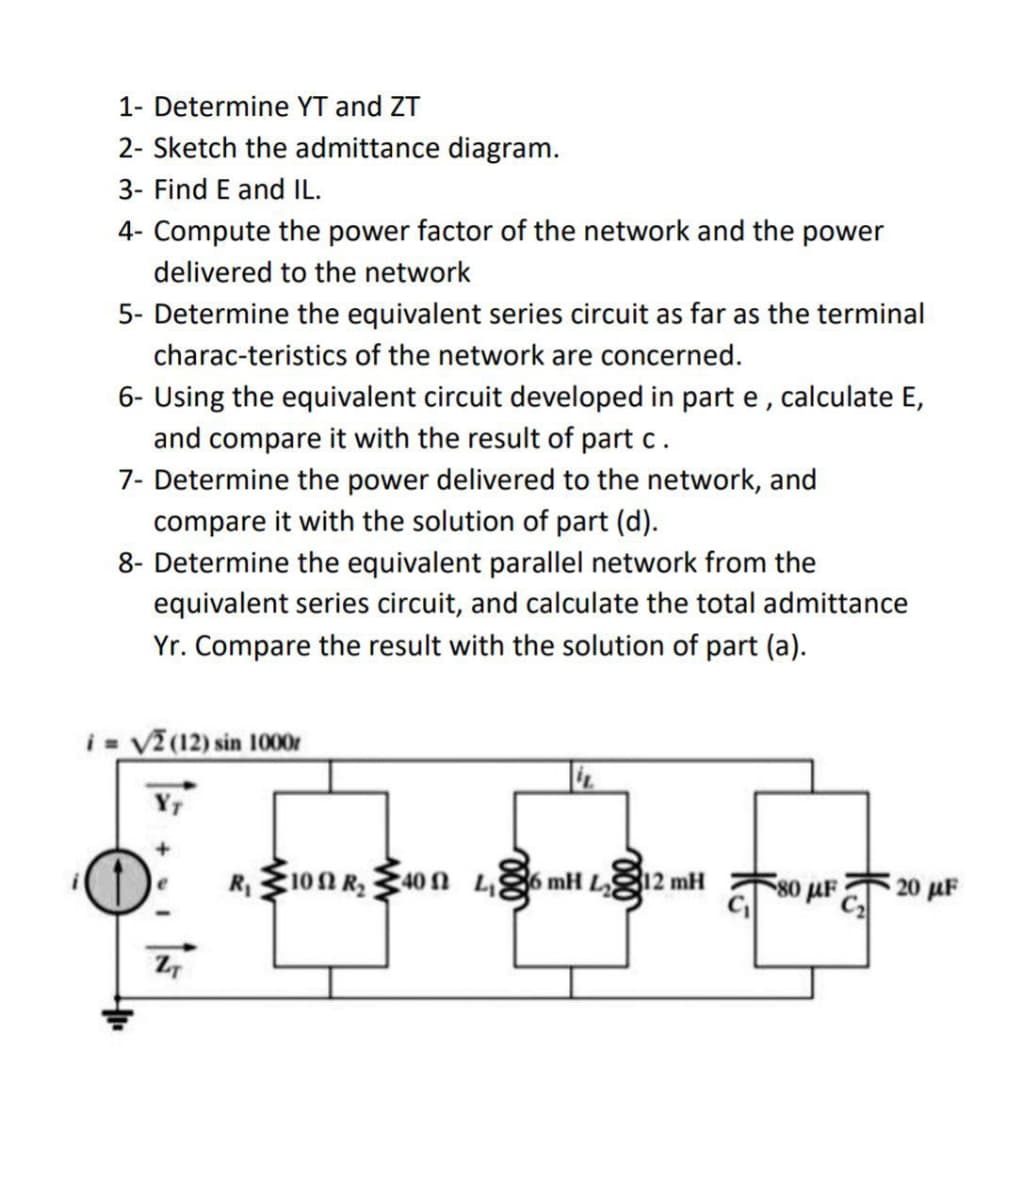 1- Determine YT and ZT
2- Sketch the admittance diagram.
3- Find E and IL.
4- Compute the power factor of the network and the power
delivered to the network
5- Determine the equivalent series circuit as far as the terminal
charac-teristics of the network are concerned.
6- Using the equivalent circuit developed in part e, calculate E,
and compare it with the result of part c.
7- Determine the power delivered to the network, and
compare it with the solution of part (d).
8- Determine the equivalent parallel network from the
equivalent series circuit, and calculate the total admittance
Yr. Compare the result with the solution of part (a).
i= √2 (12) sin 1000r
ZT
R₁100 R₂40 L₁6 mH L12 mH
80 μF
20 µF